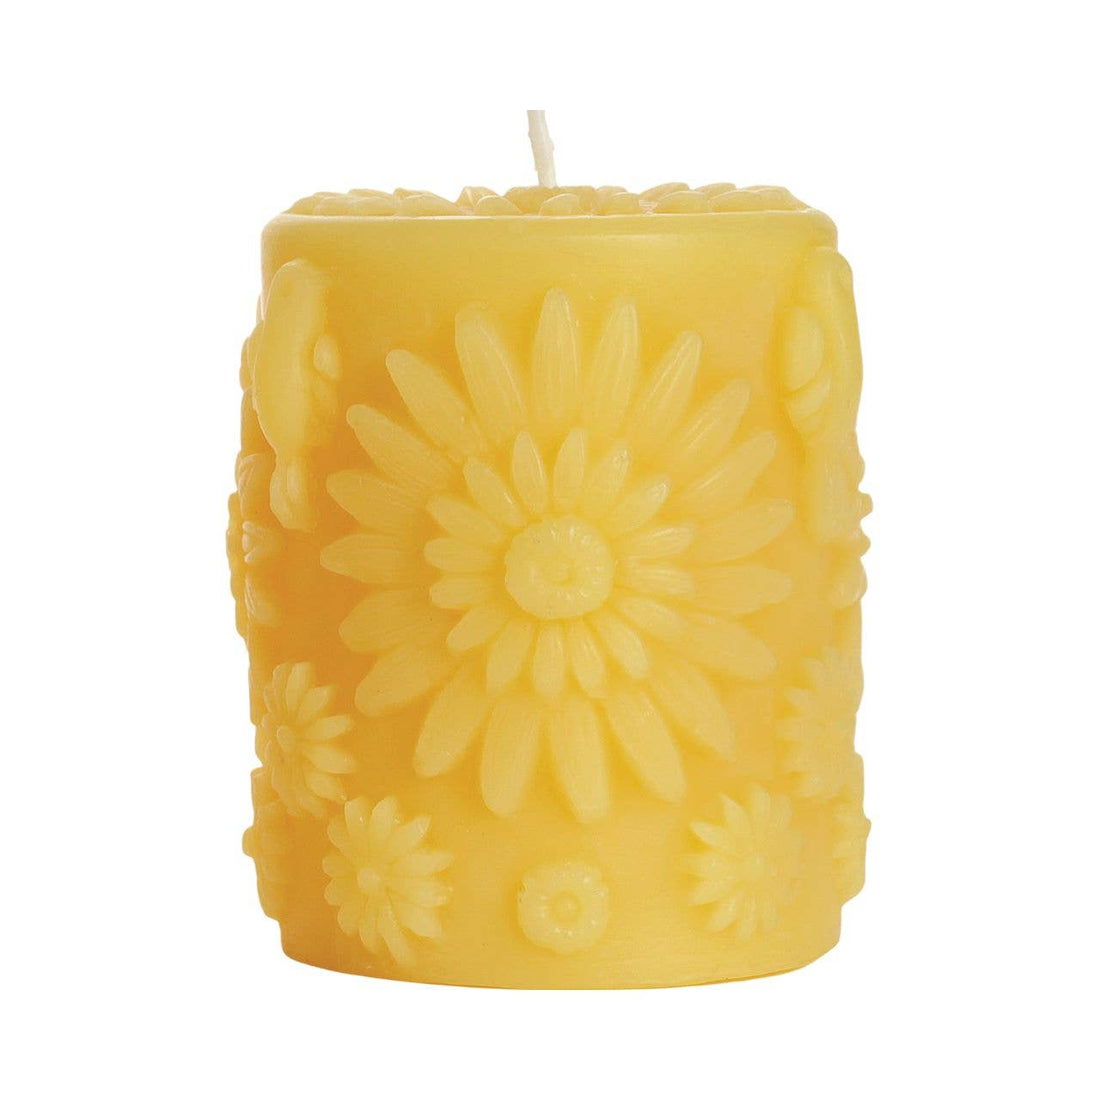 A yellow beeswax pillar candle covered with large and small 3D circular flowers, including a flower on the top surface.